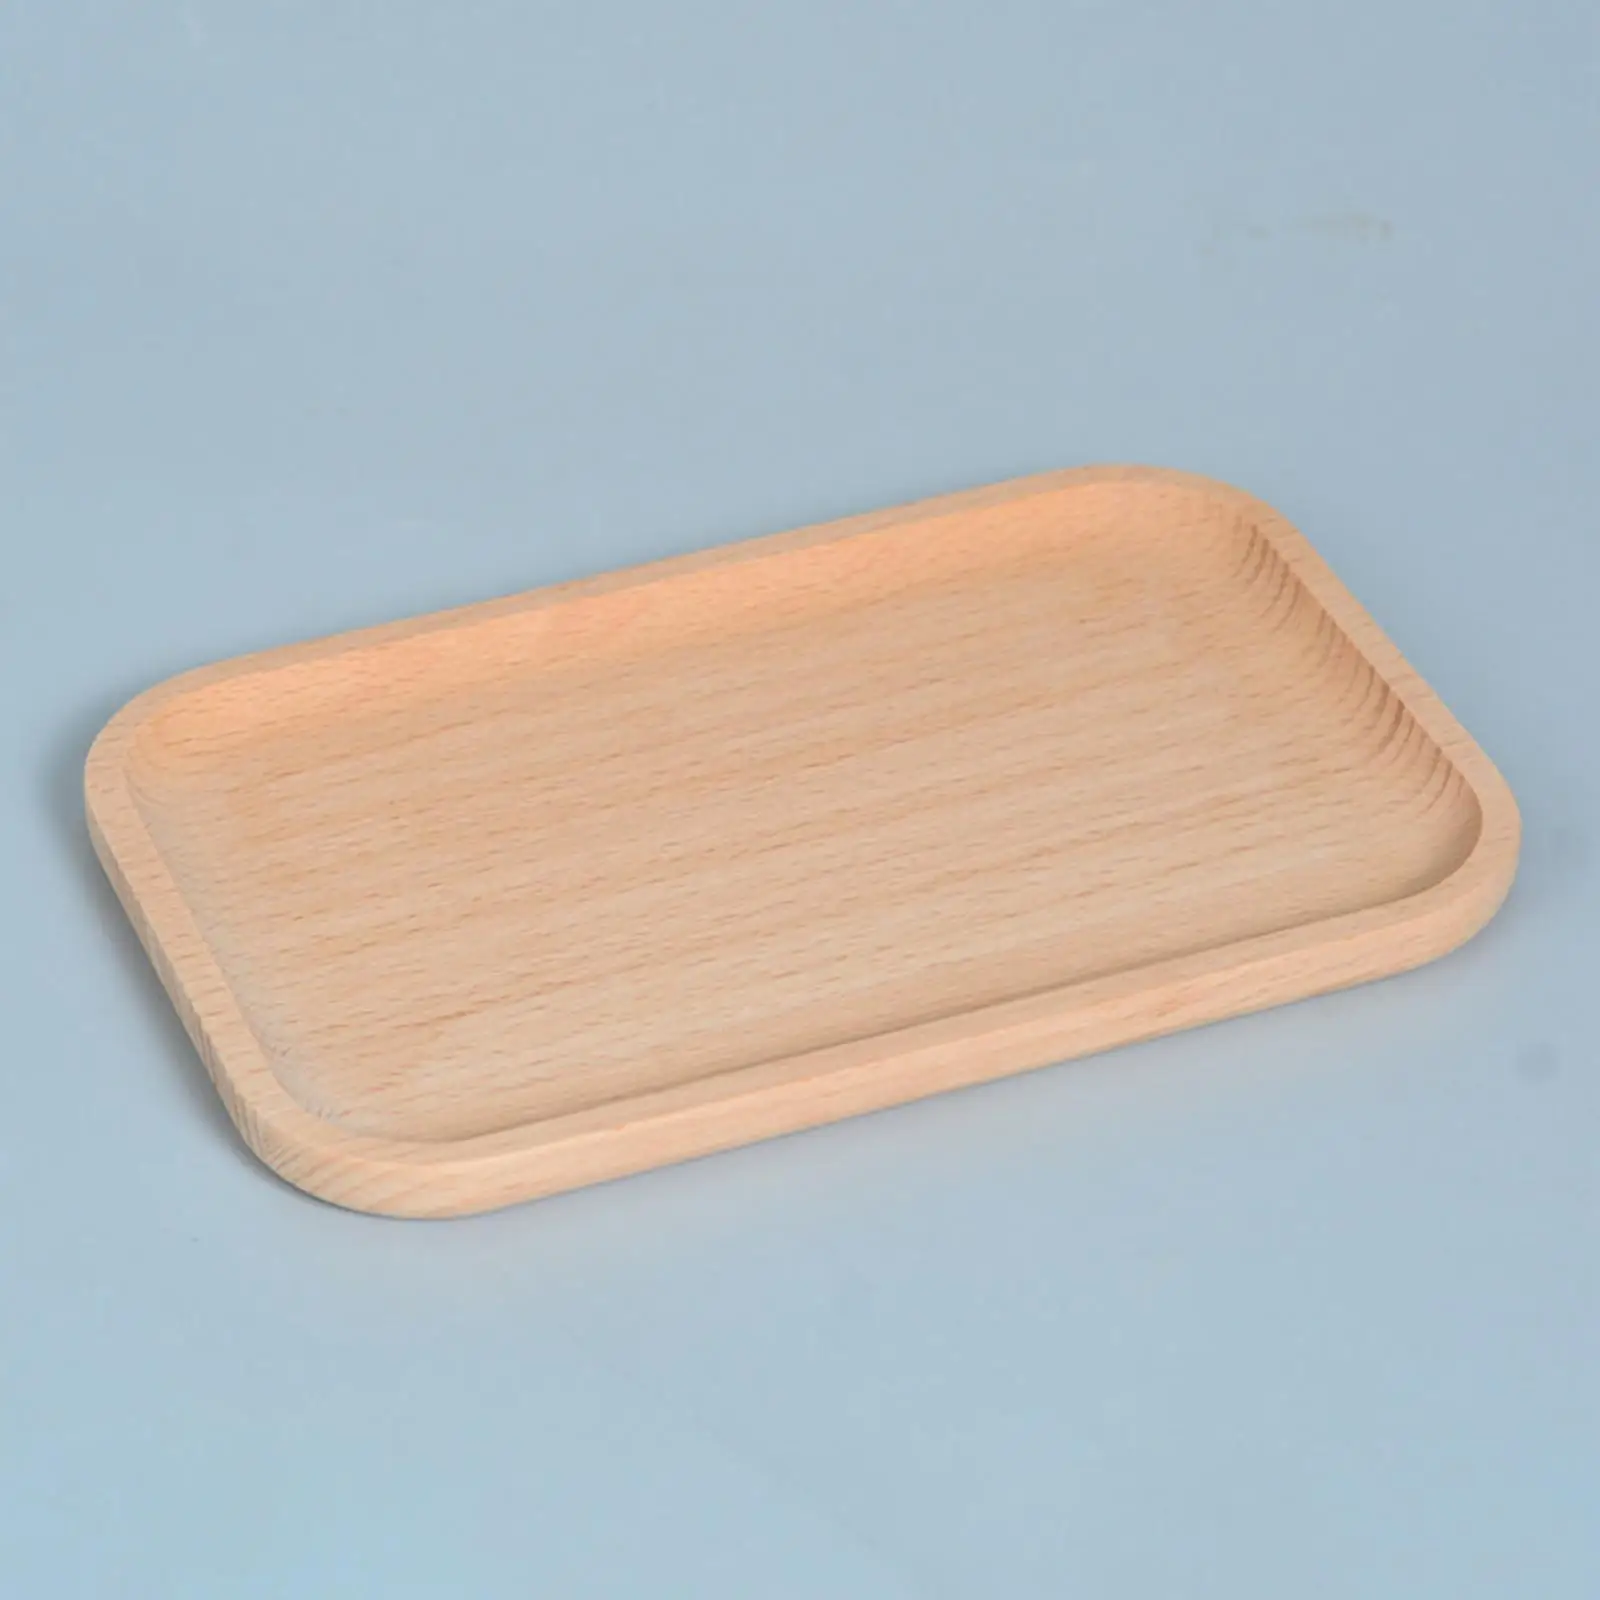 Wooden Serving Tray Home Food Tray for Restaurant Countertop Bedroom